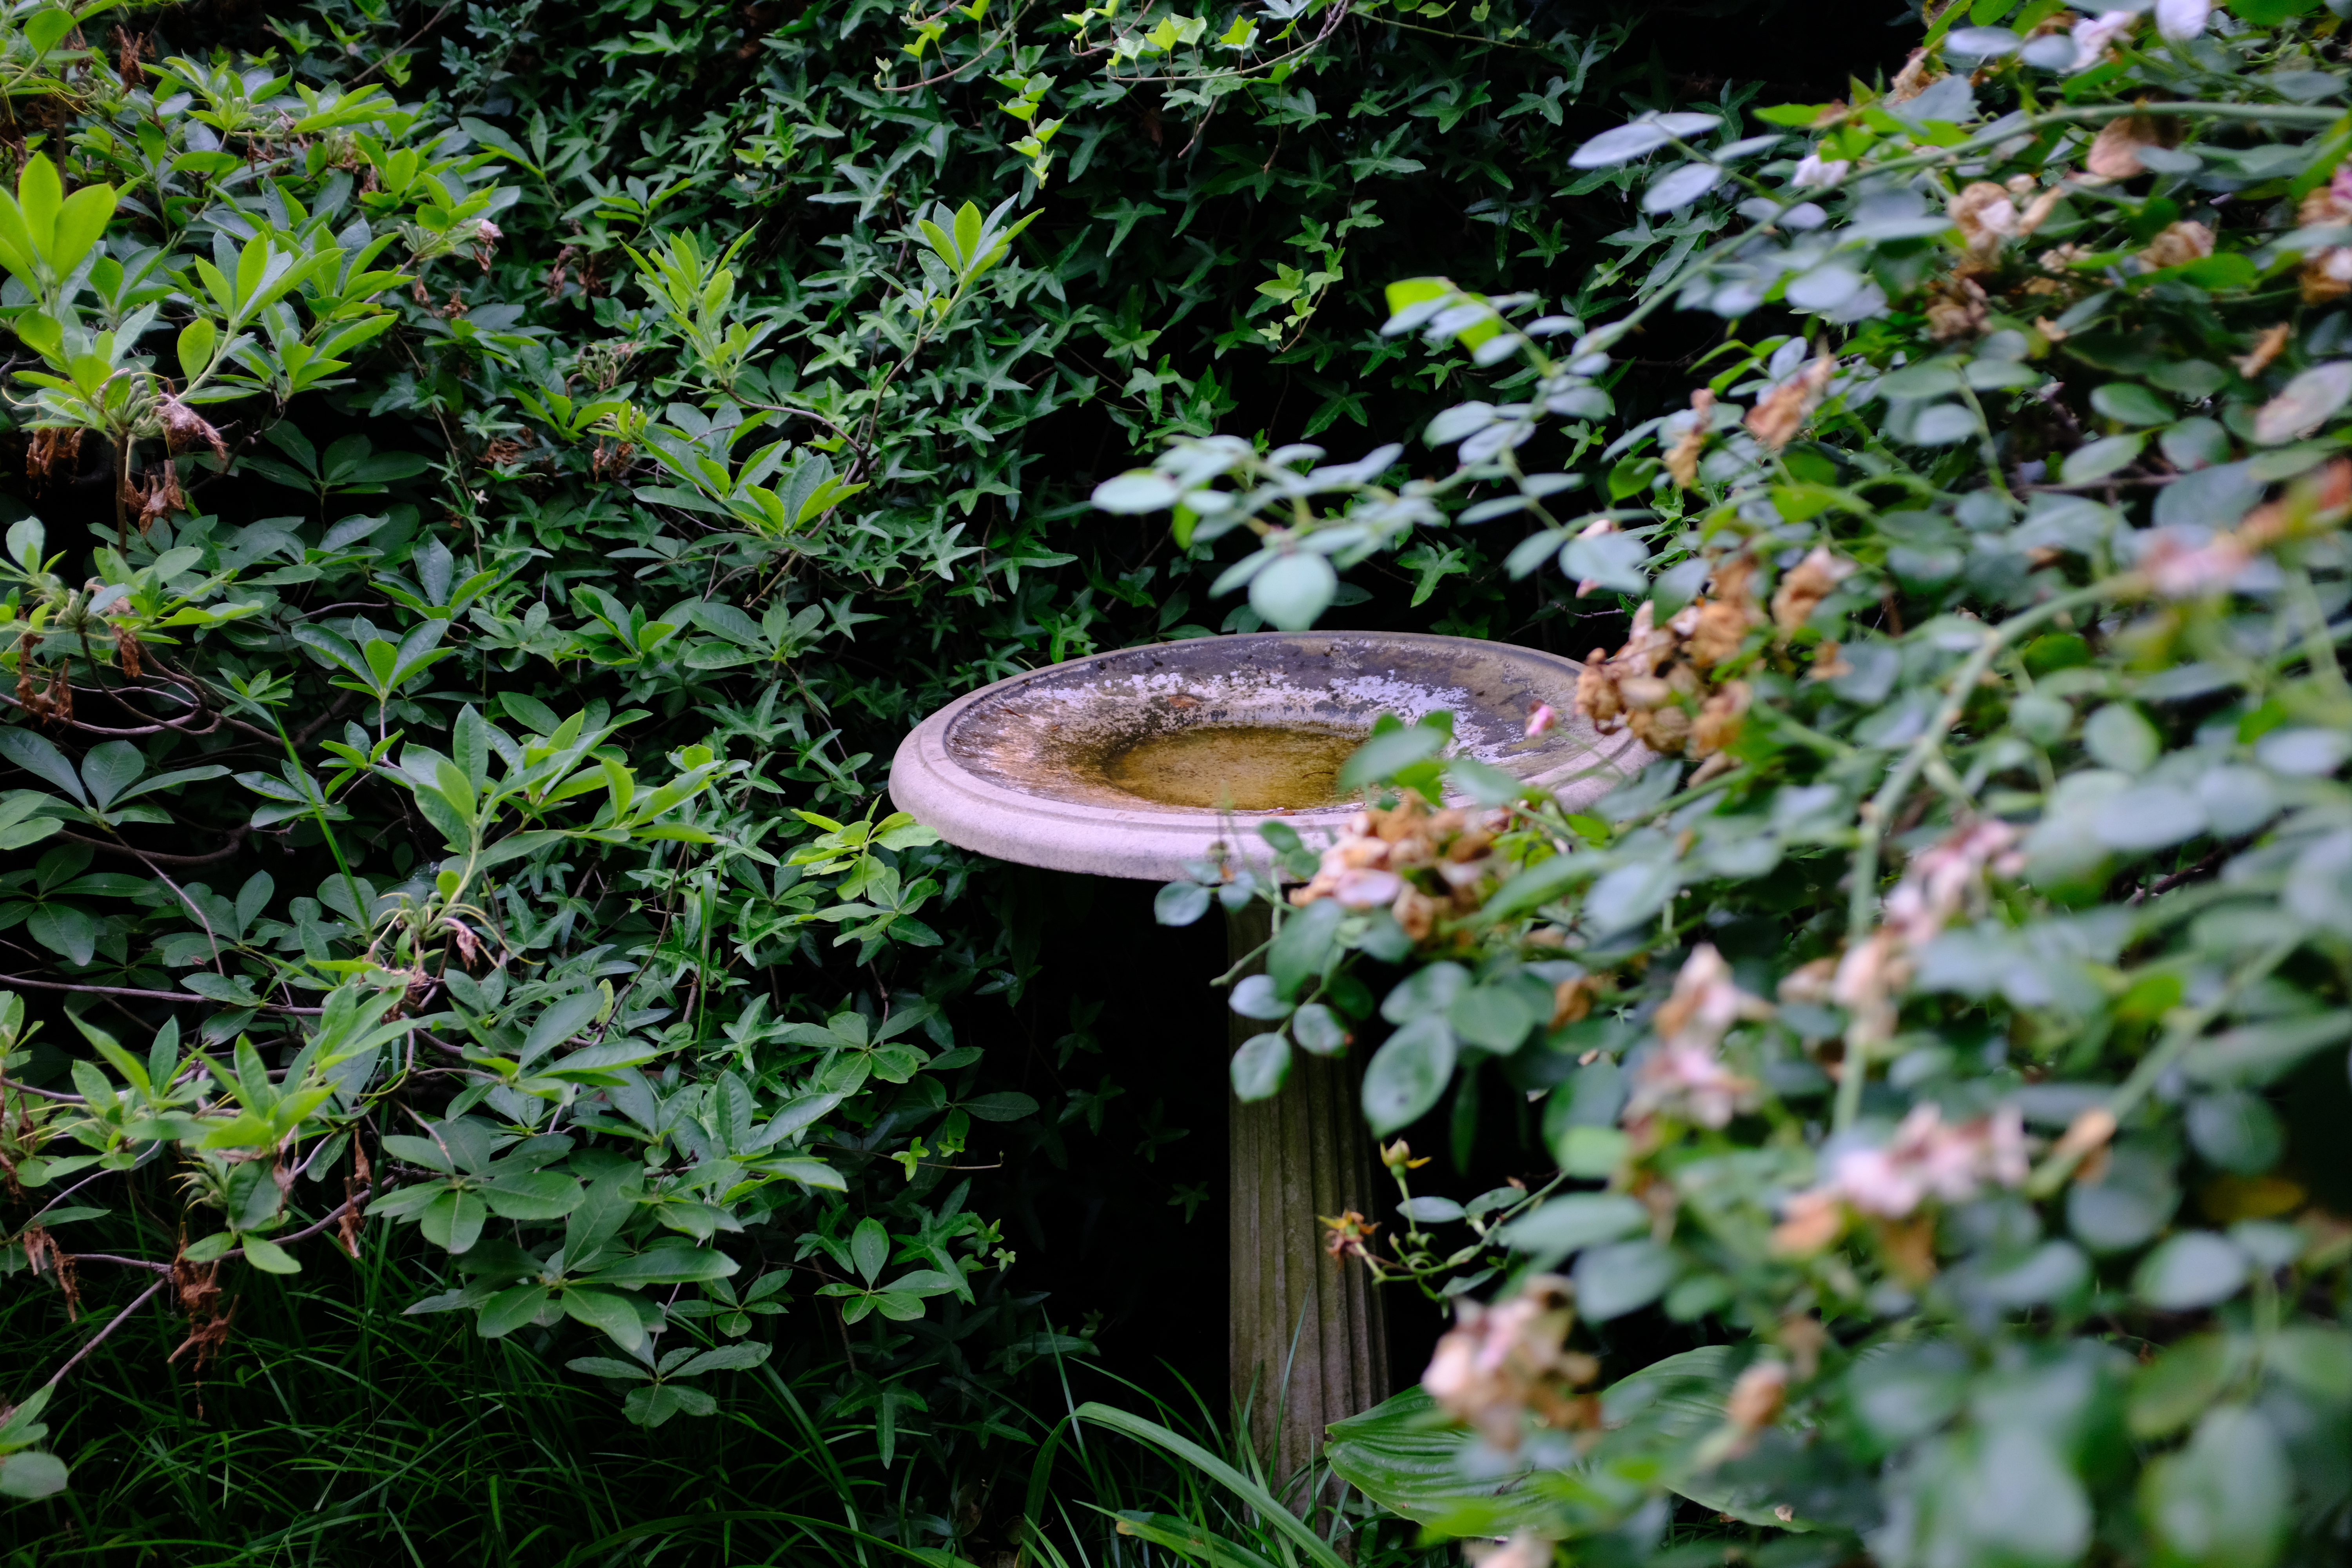 Old stone fountain hidden behind bushes.